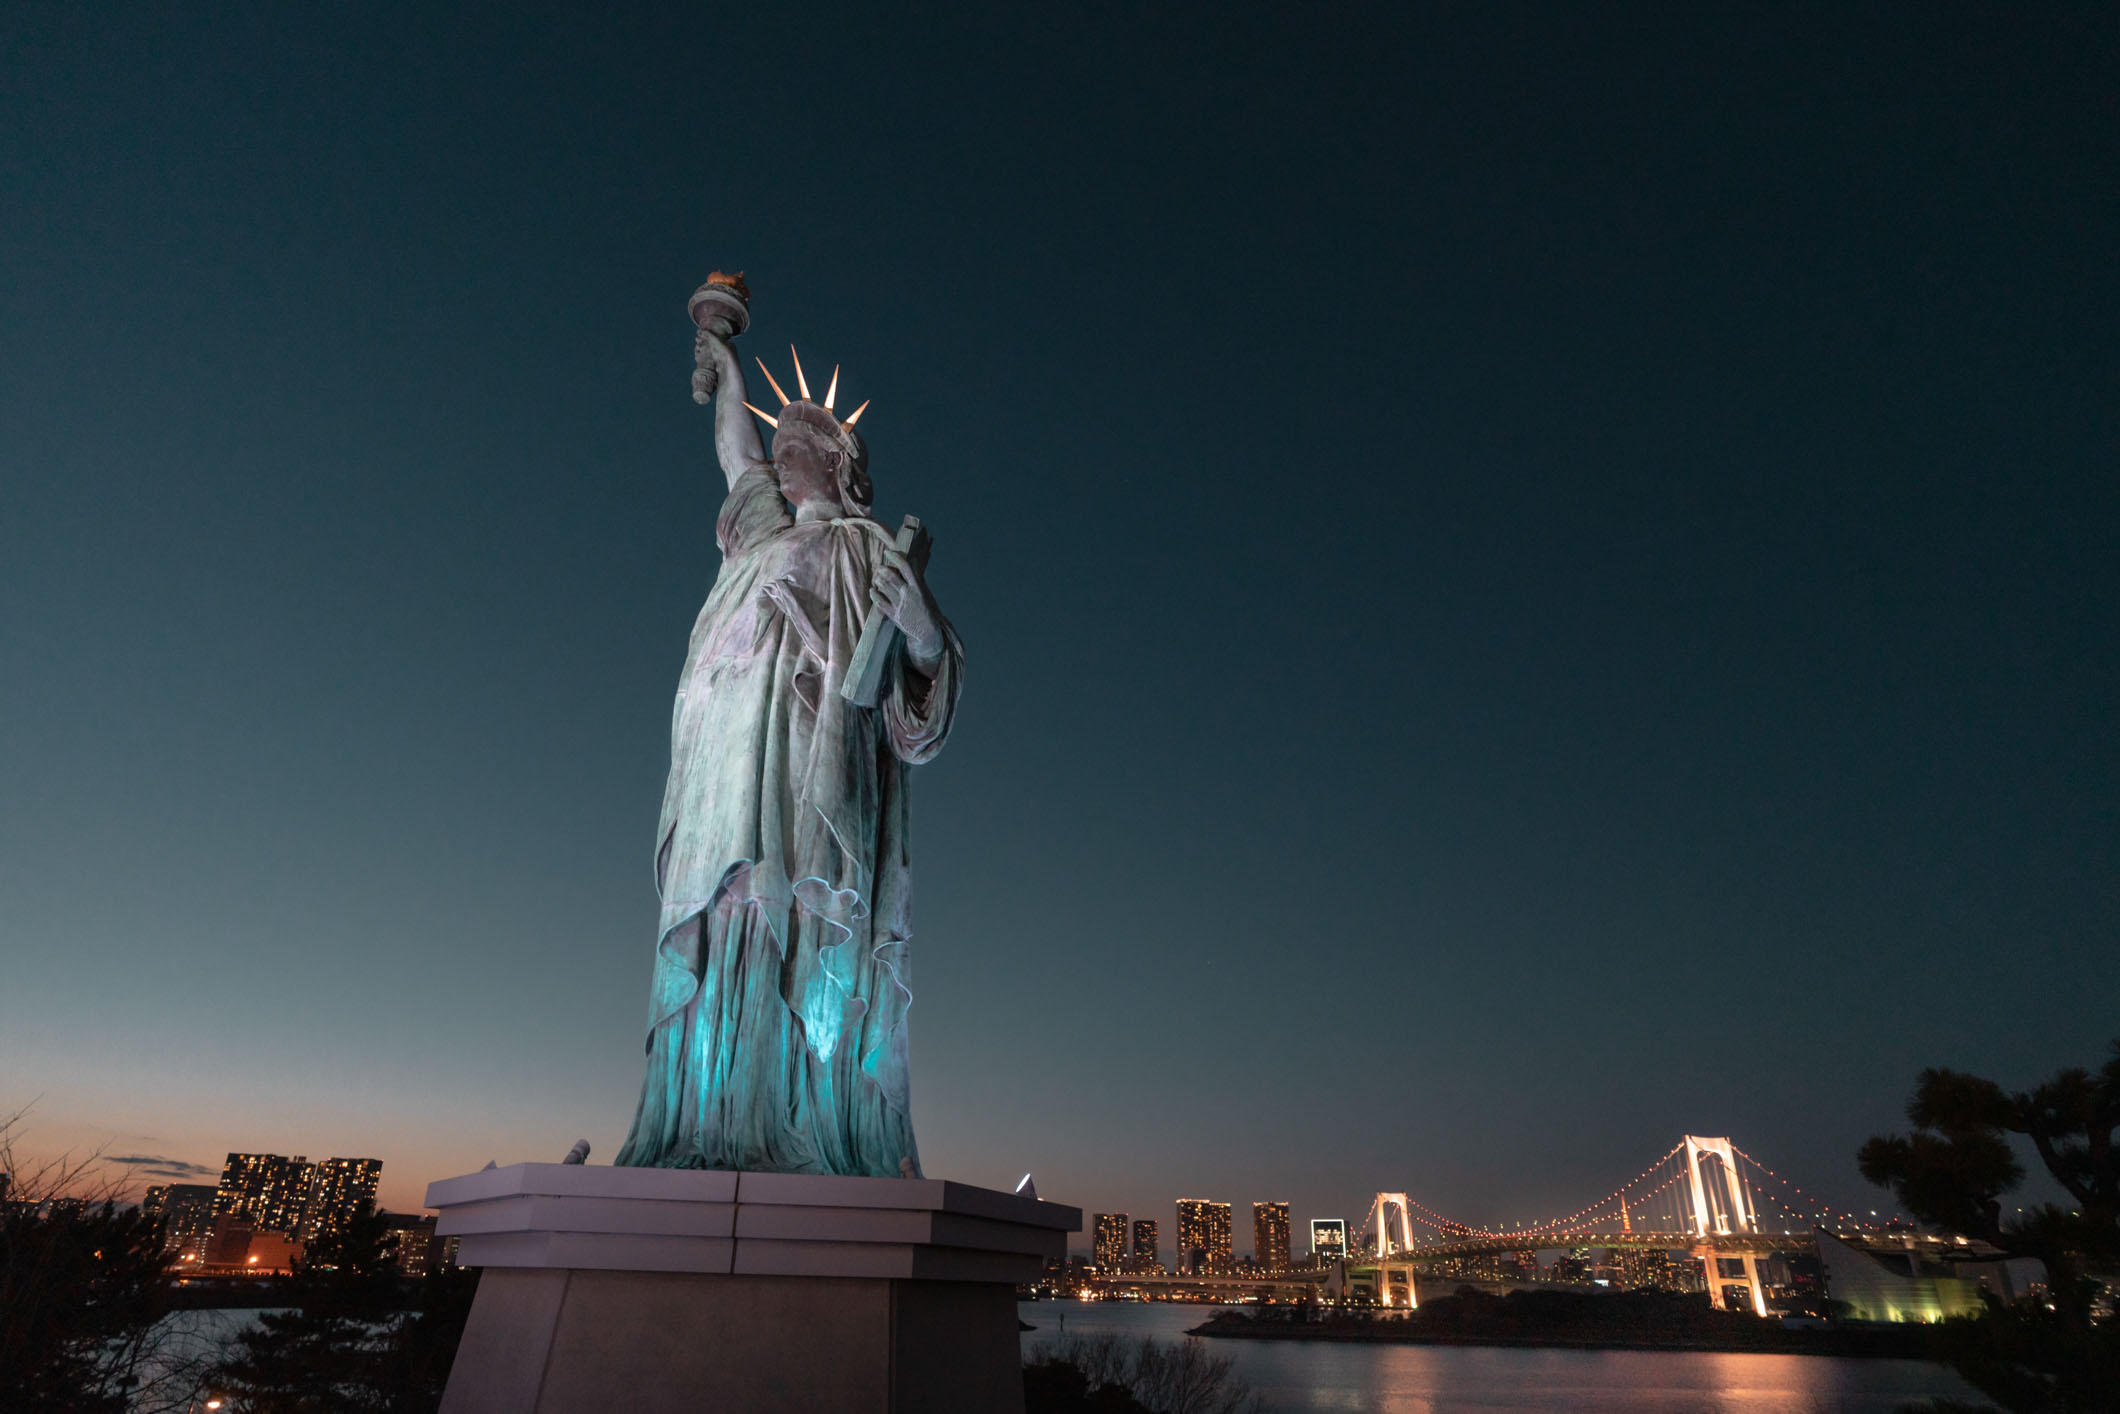 Things To Do In Odaiba Tokyo - Don't Miss The Statue of Liberty And The Rainbow Bridge